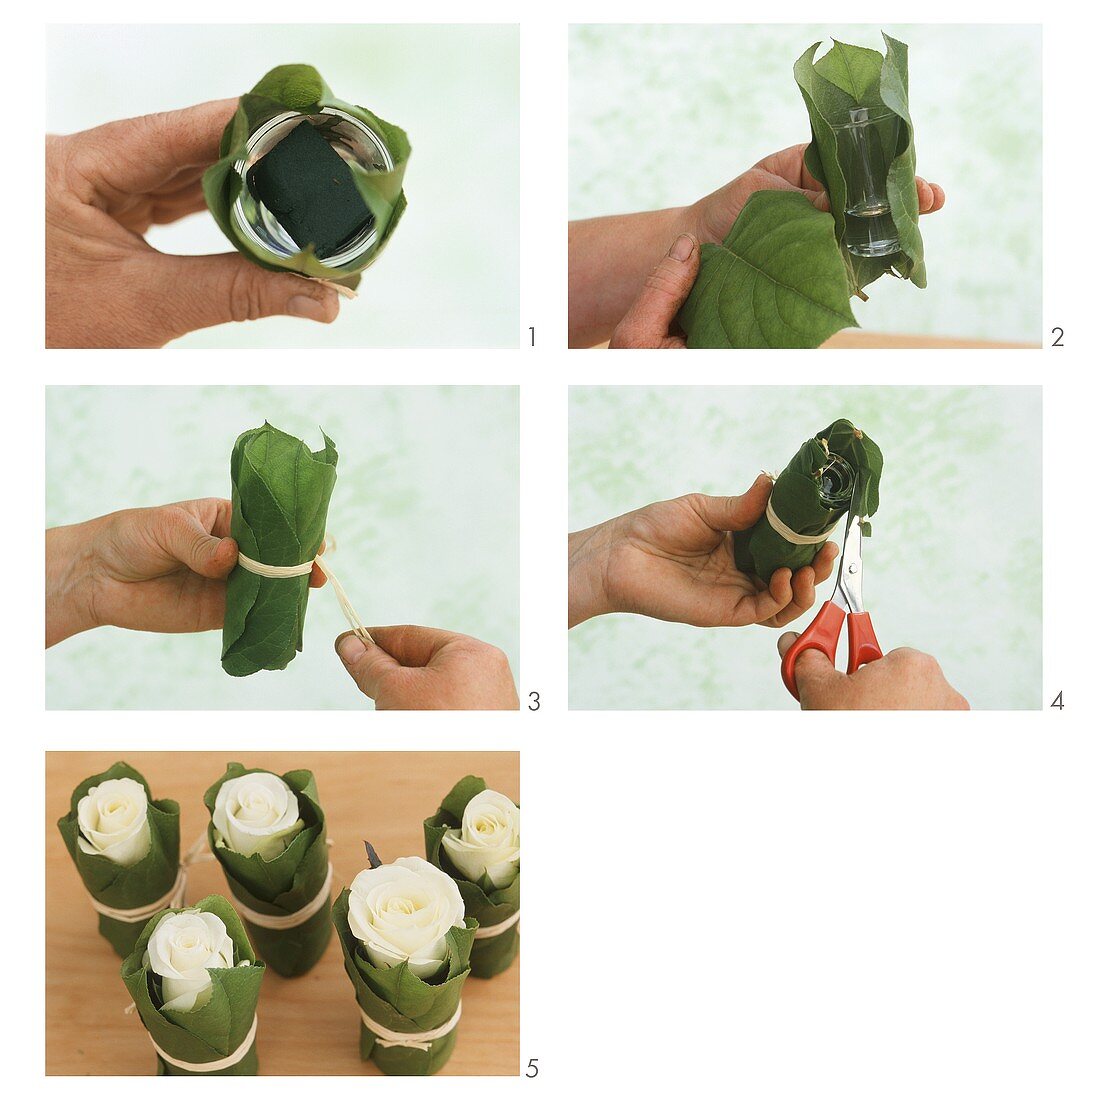 Decorating roses in glasses wrapped in leaves